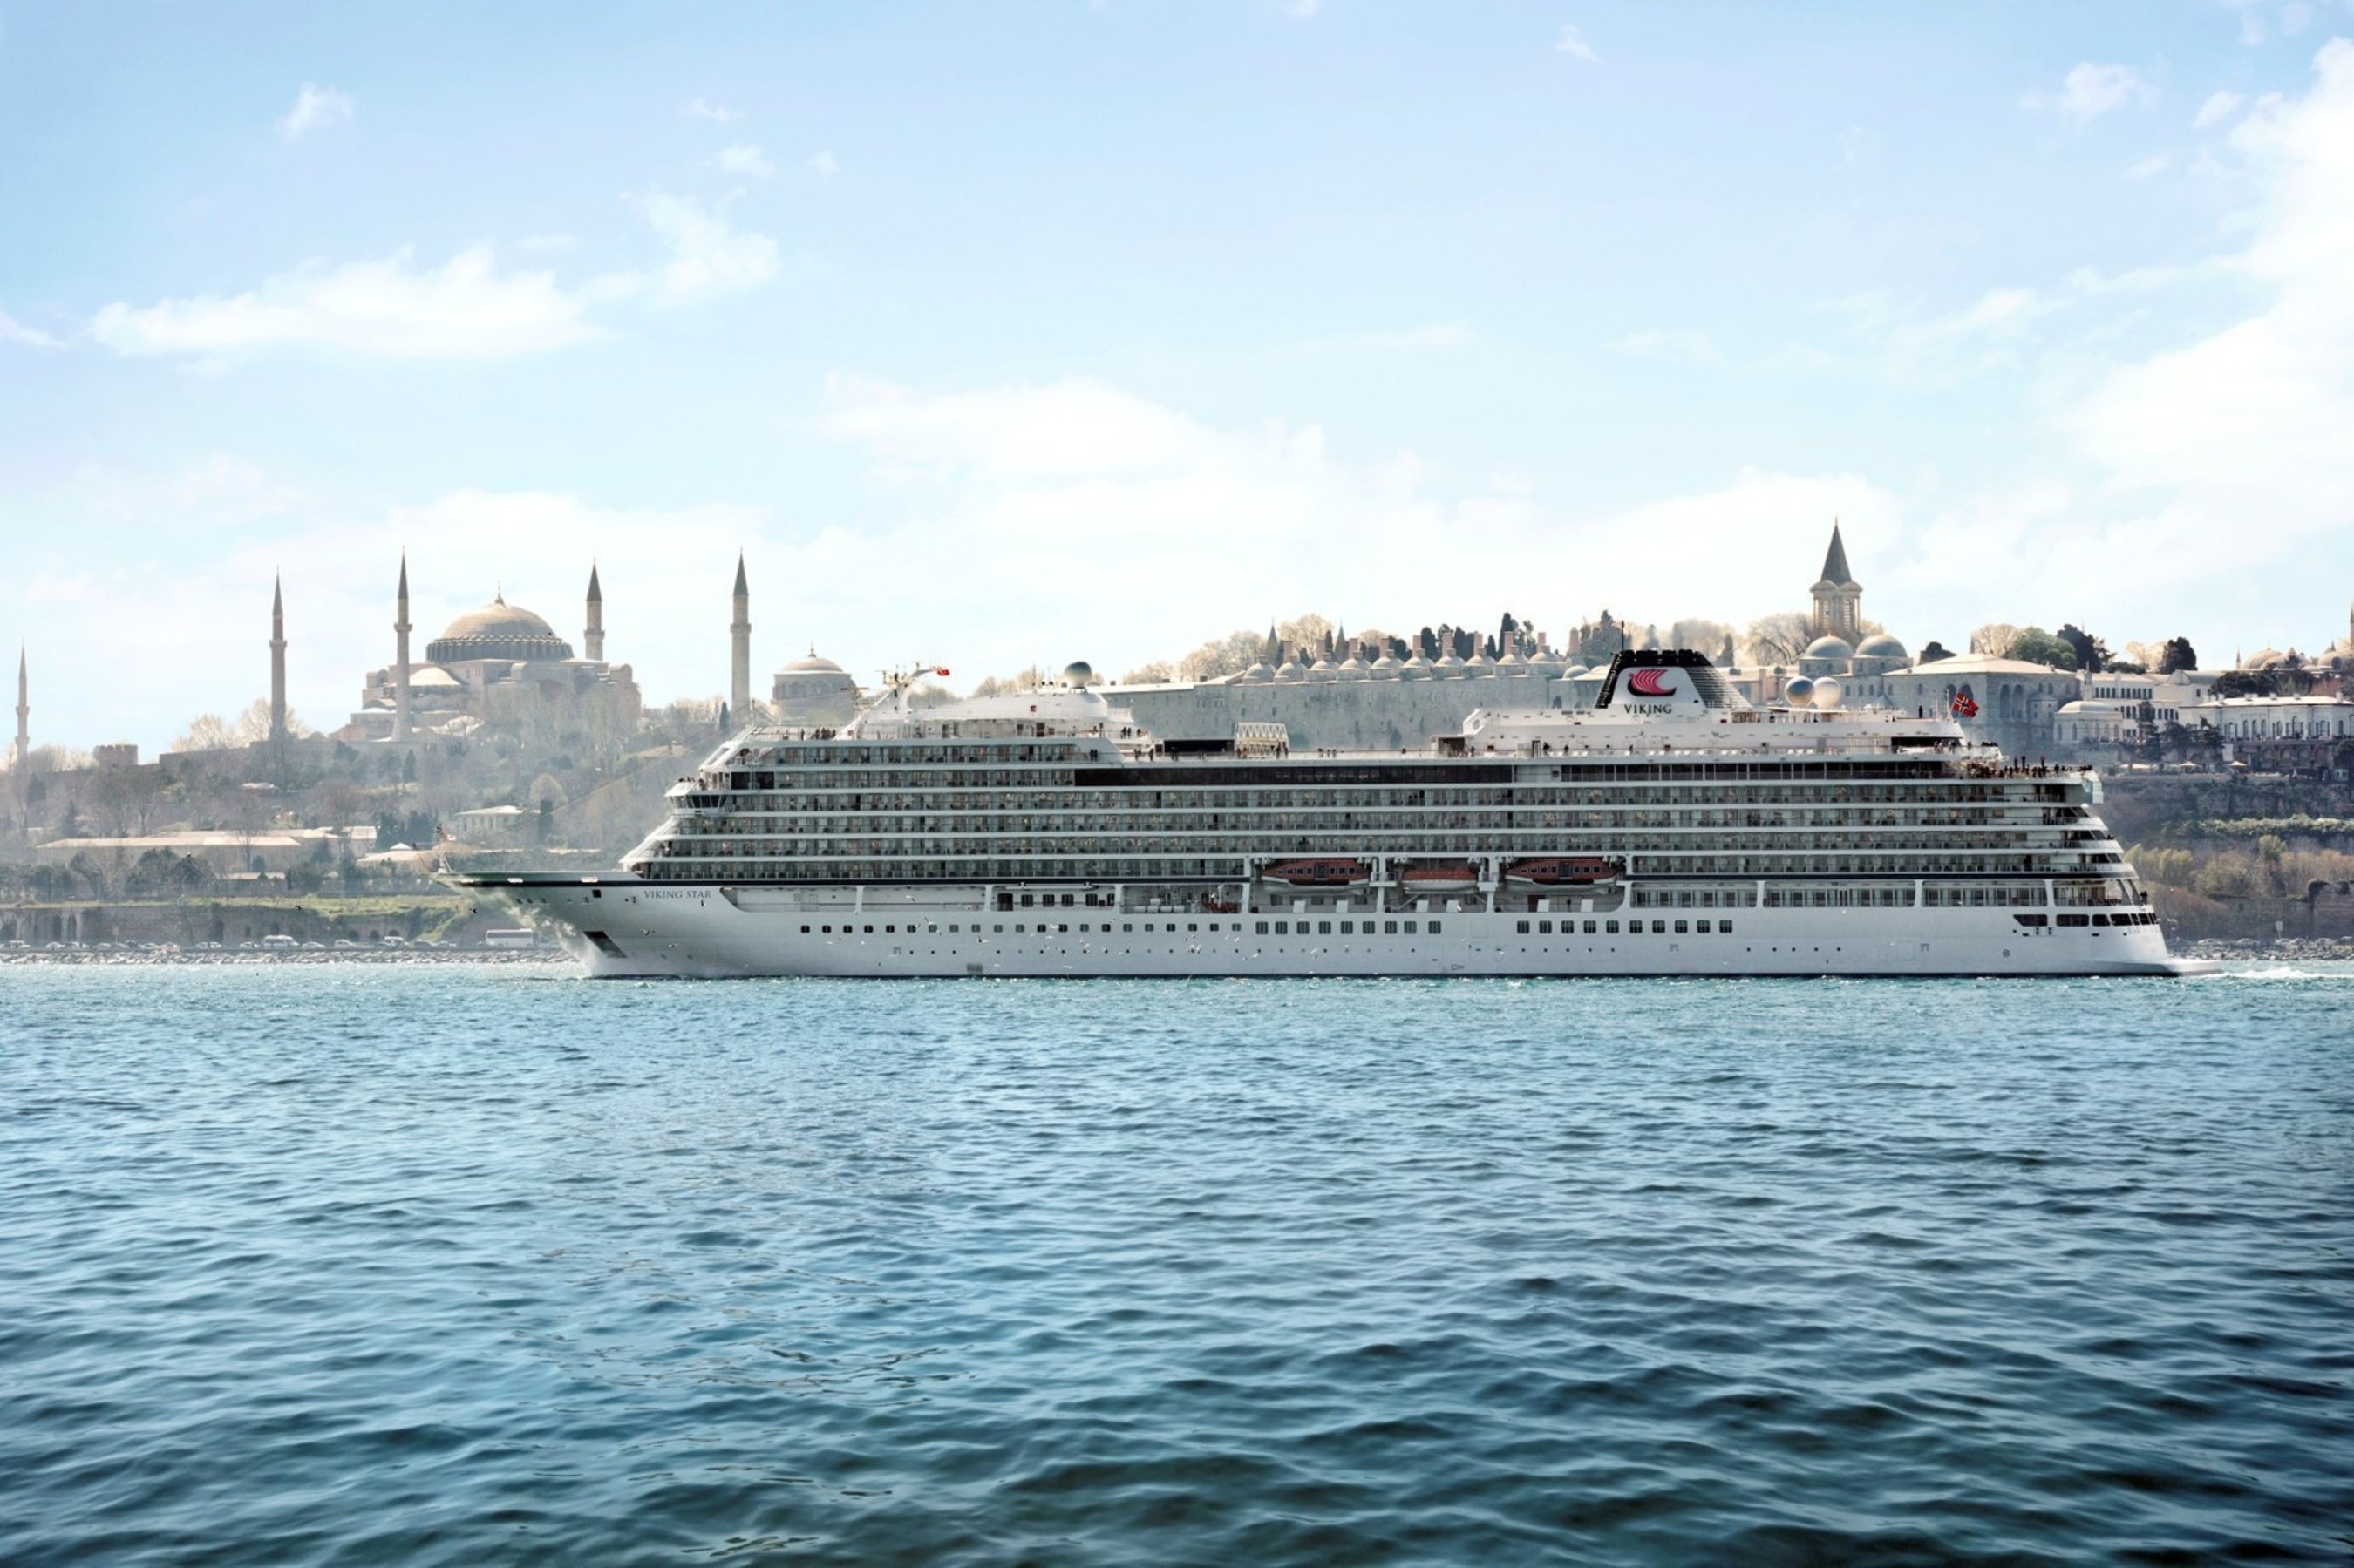 The first new ship from Viking Ocean Cruises, Viking Star, sails past Hagia Sophia on her maiden voyage from Istanbul to Venice, launching the travel industry's first entirely new cruise line in a decade. Viking Ocean Cruises was developed from the ground up with experienced travelers in mind. Itineraries are designed for maximum time in port, often with late evenings or overnights, so guests can experience local culture at night or evening performances. Ports include both cosmopolitan cities and "collector ports," appealing to those with an interest in history, art, music, and cuisine. For more information, visit www.vikingoceancruises.com.